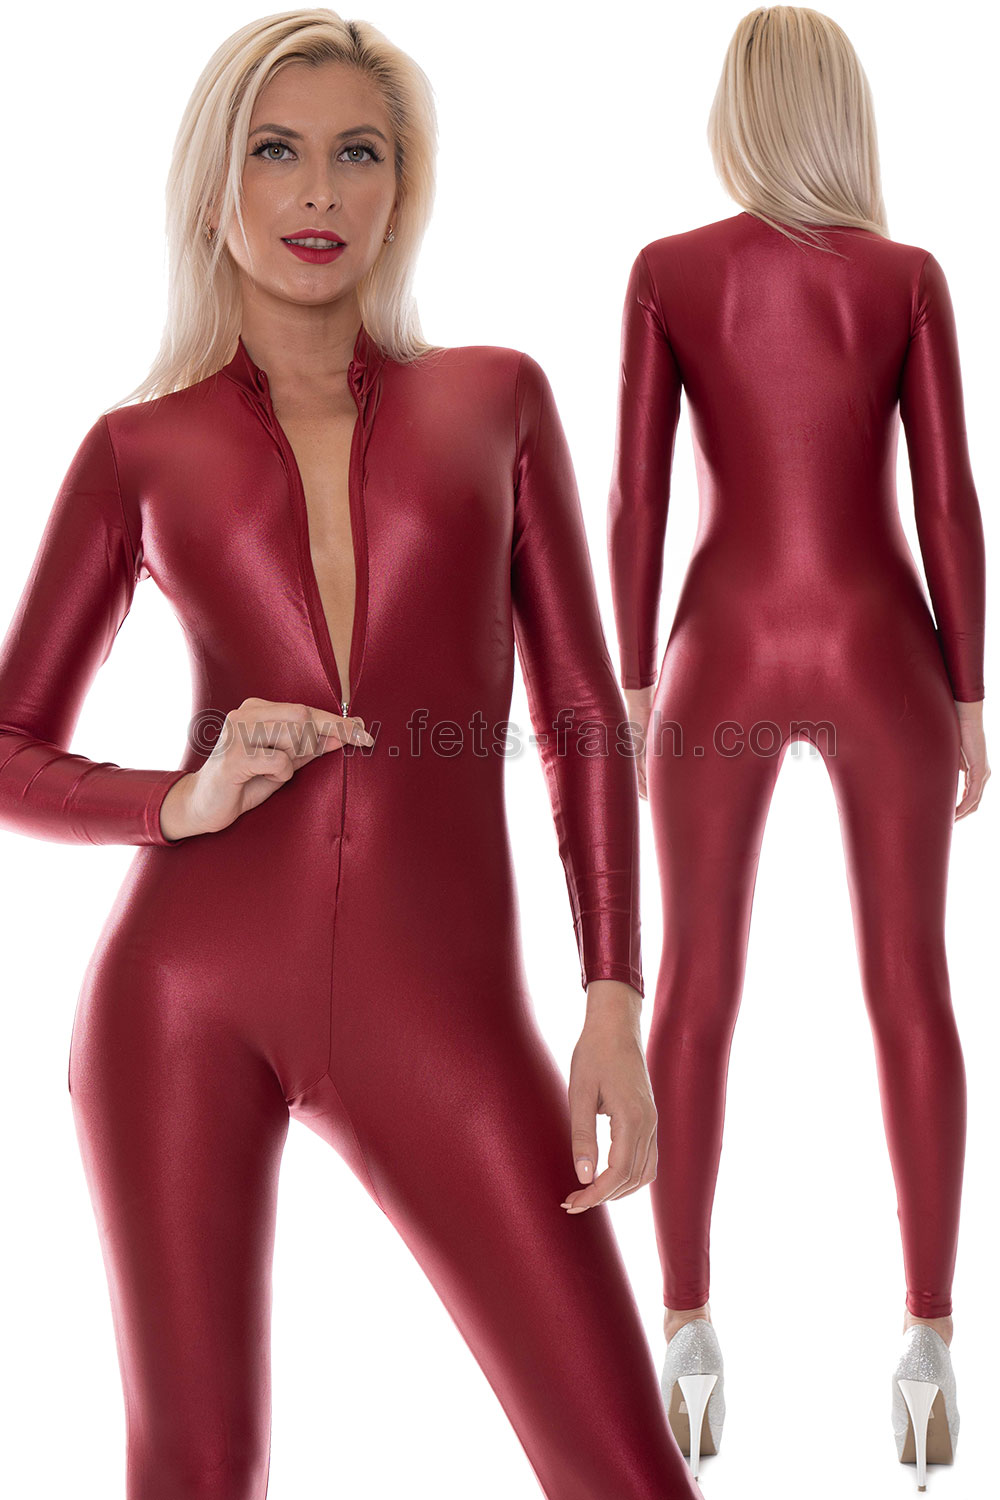 Catsuit Granata Chintz With Front Zipper From Fets Fash In All Lycra Colors F 1094